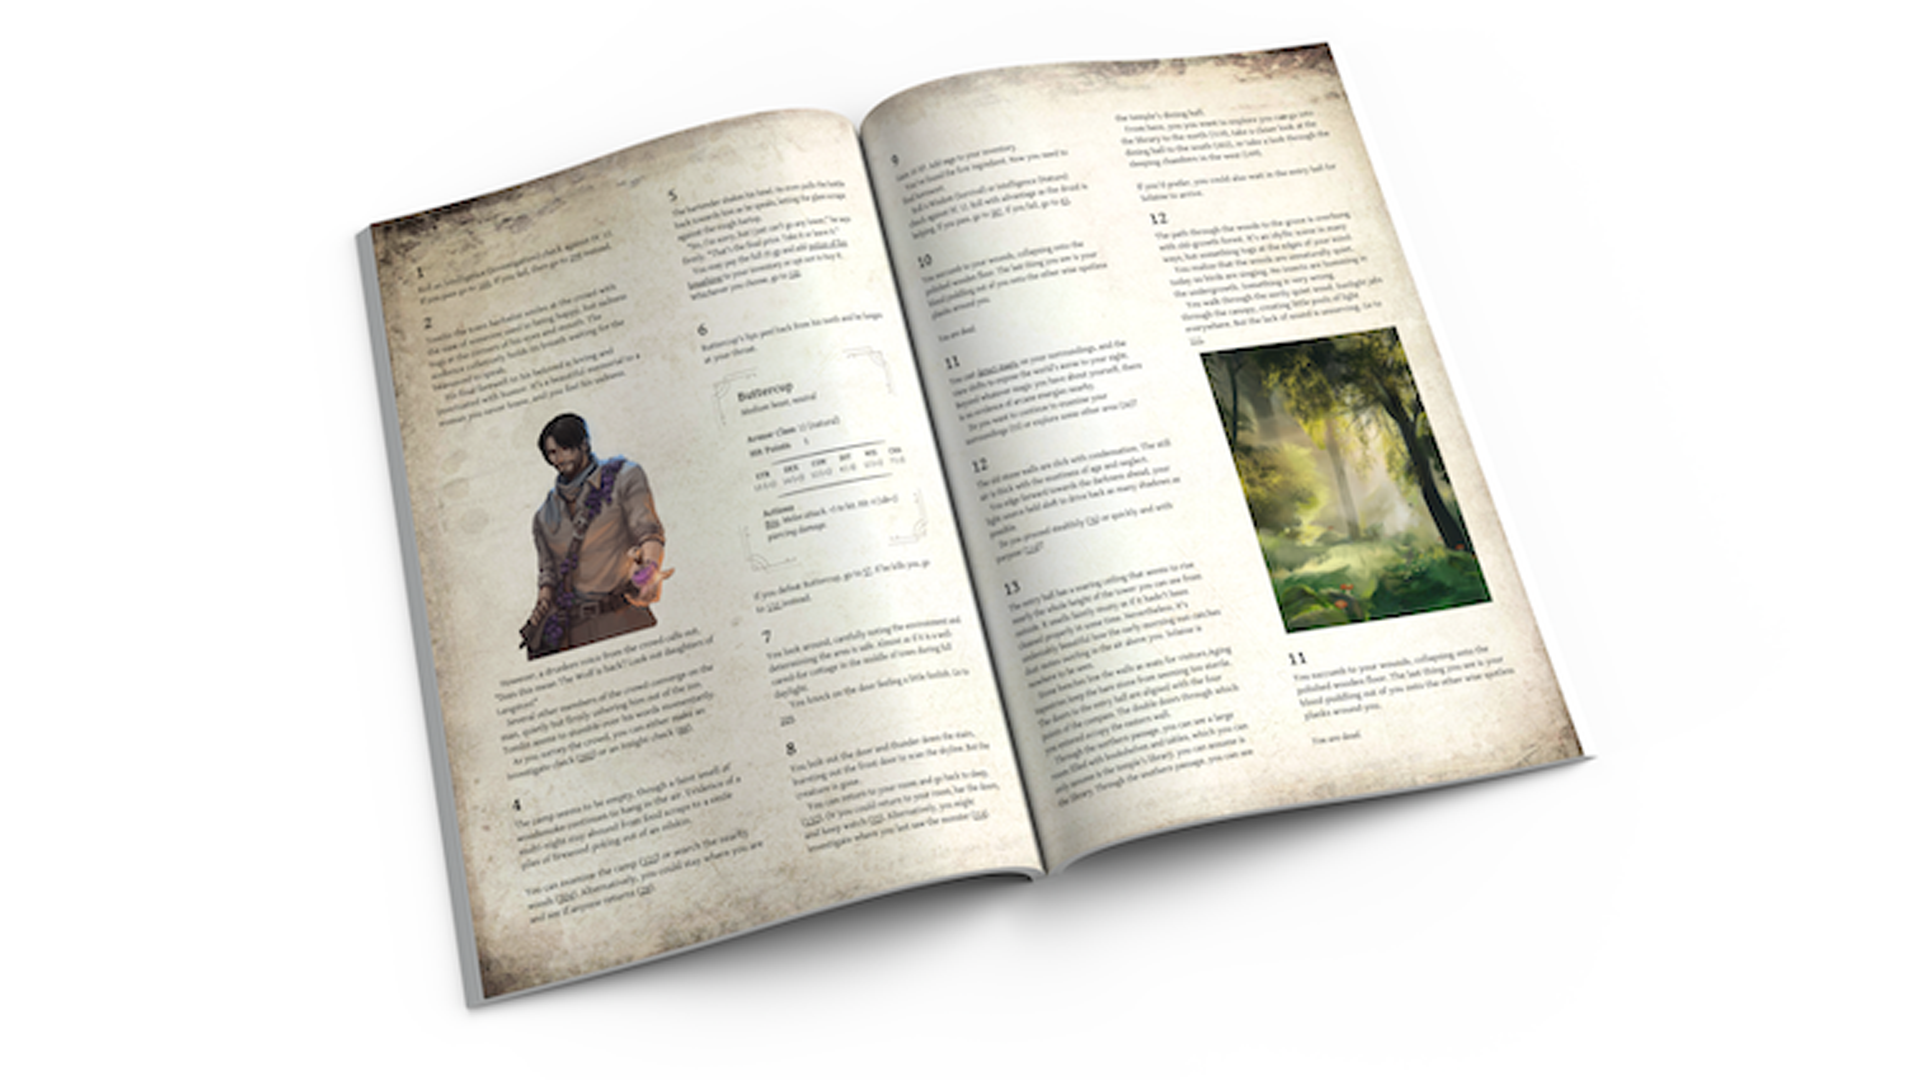 The Wolves of Langston RPG page layout spread